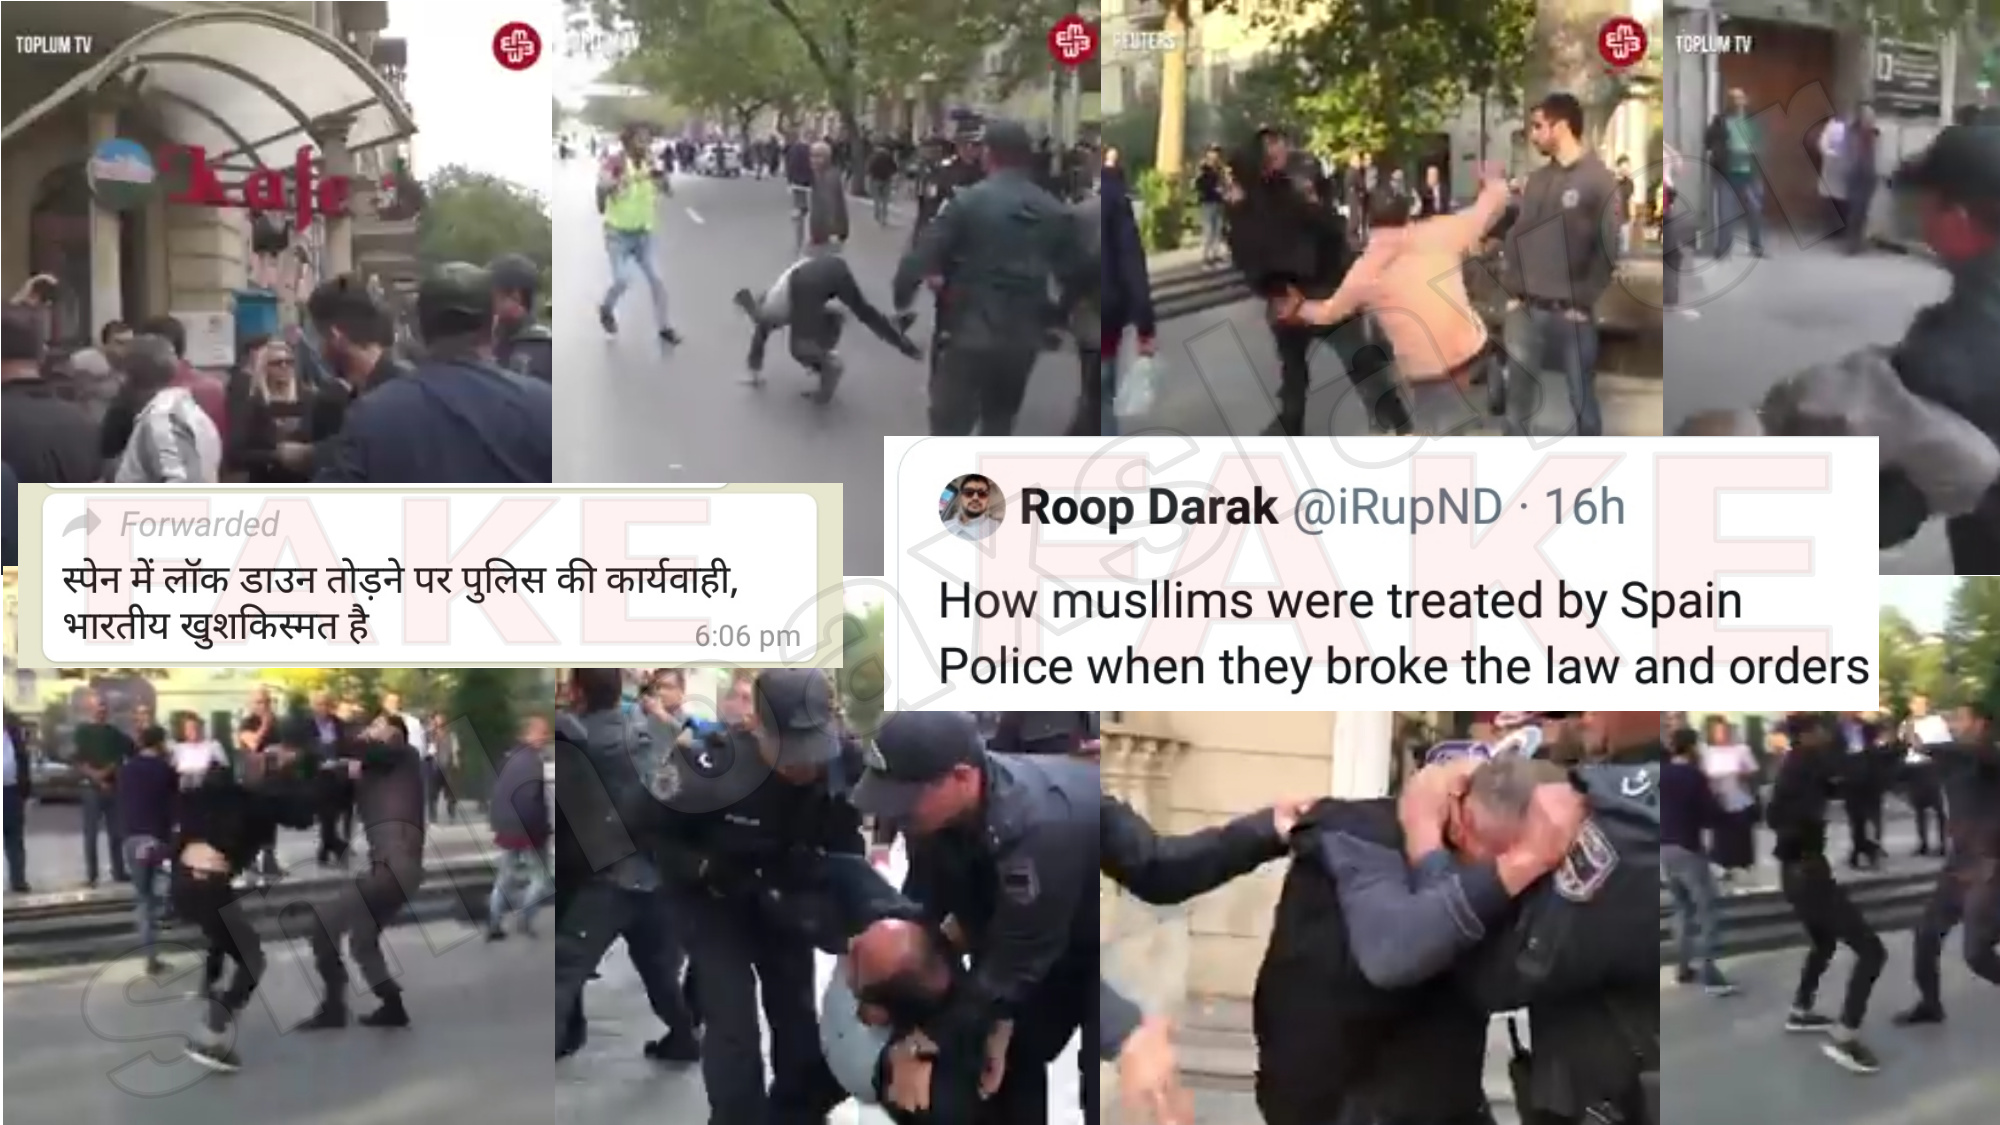 Video of Police beating people is neither related to CoronaVirus nor from Spain. - Swachh Social Media Abhiyaan.